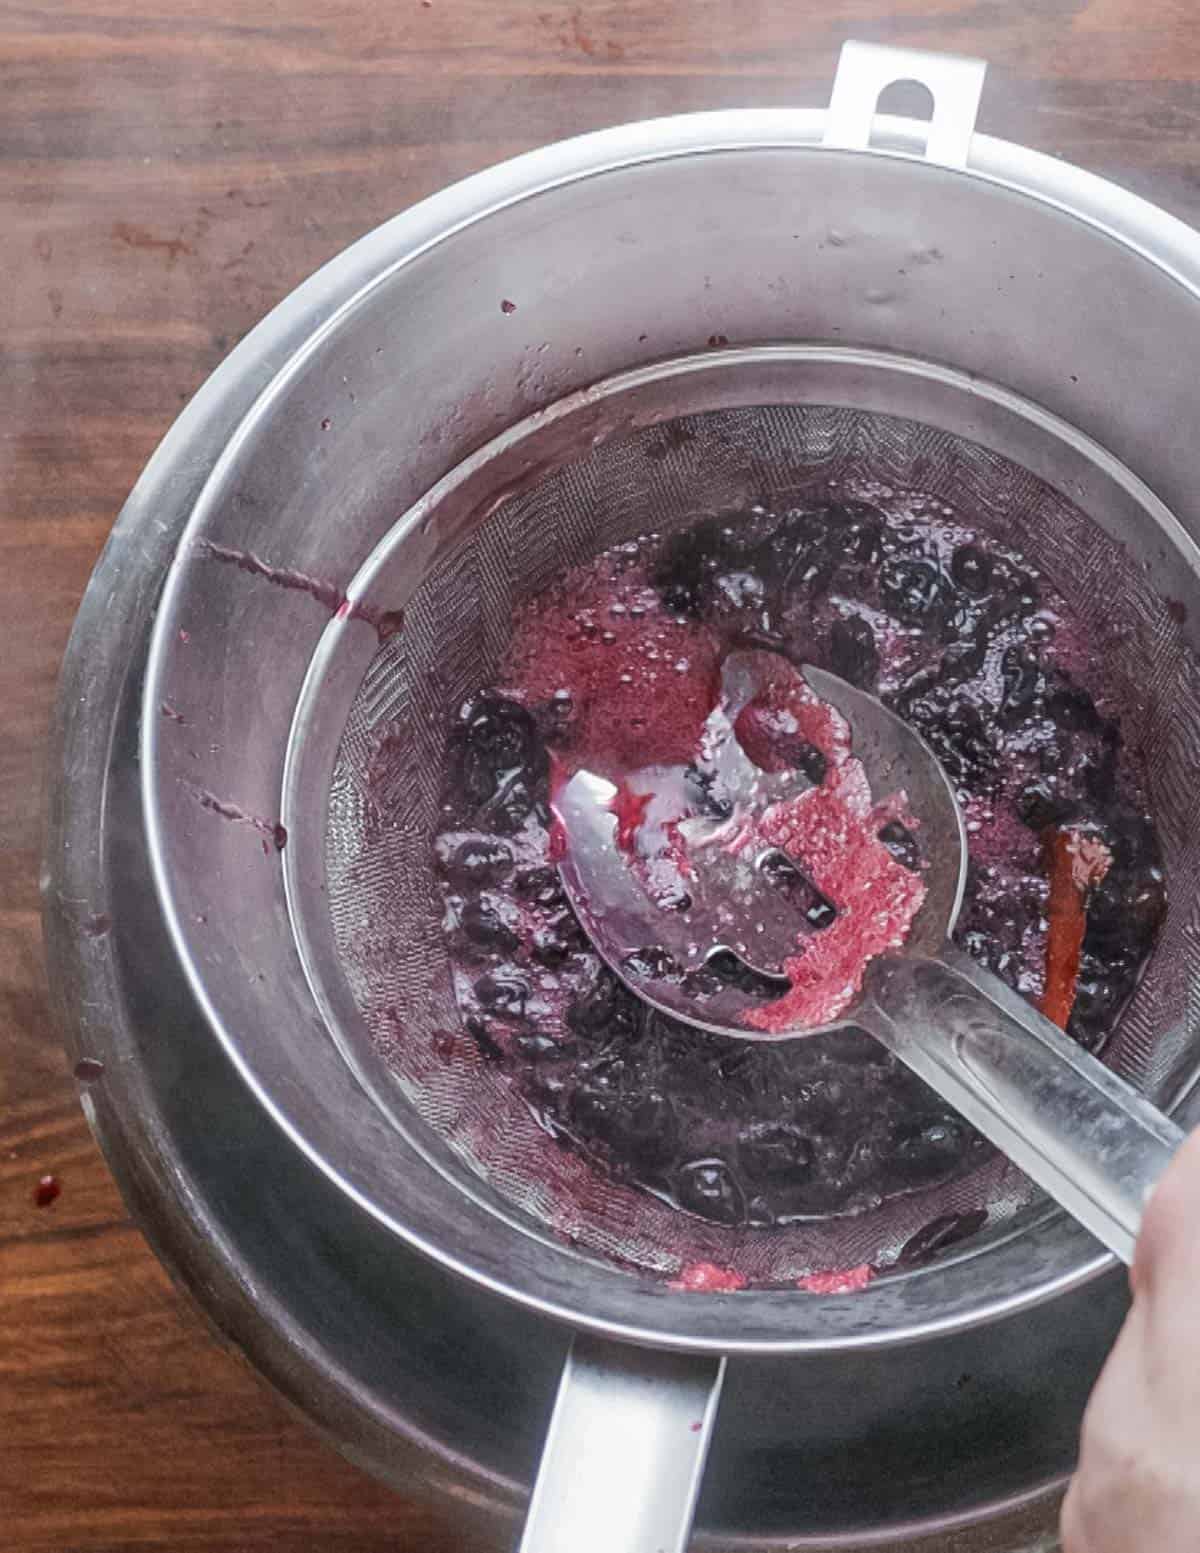 Straining blueberry syrup with a chinois strainer.